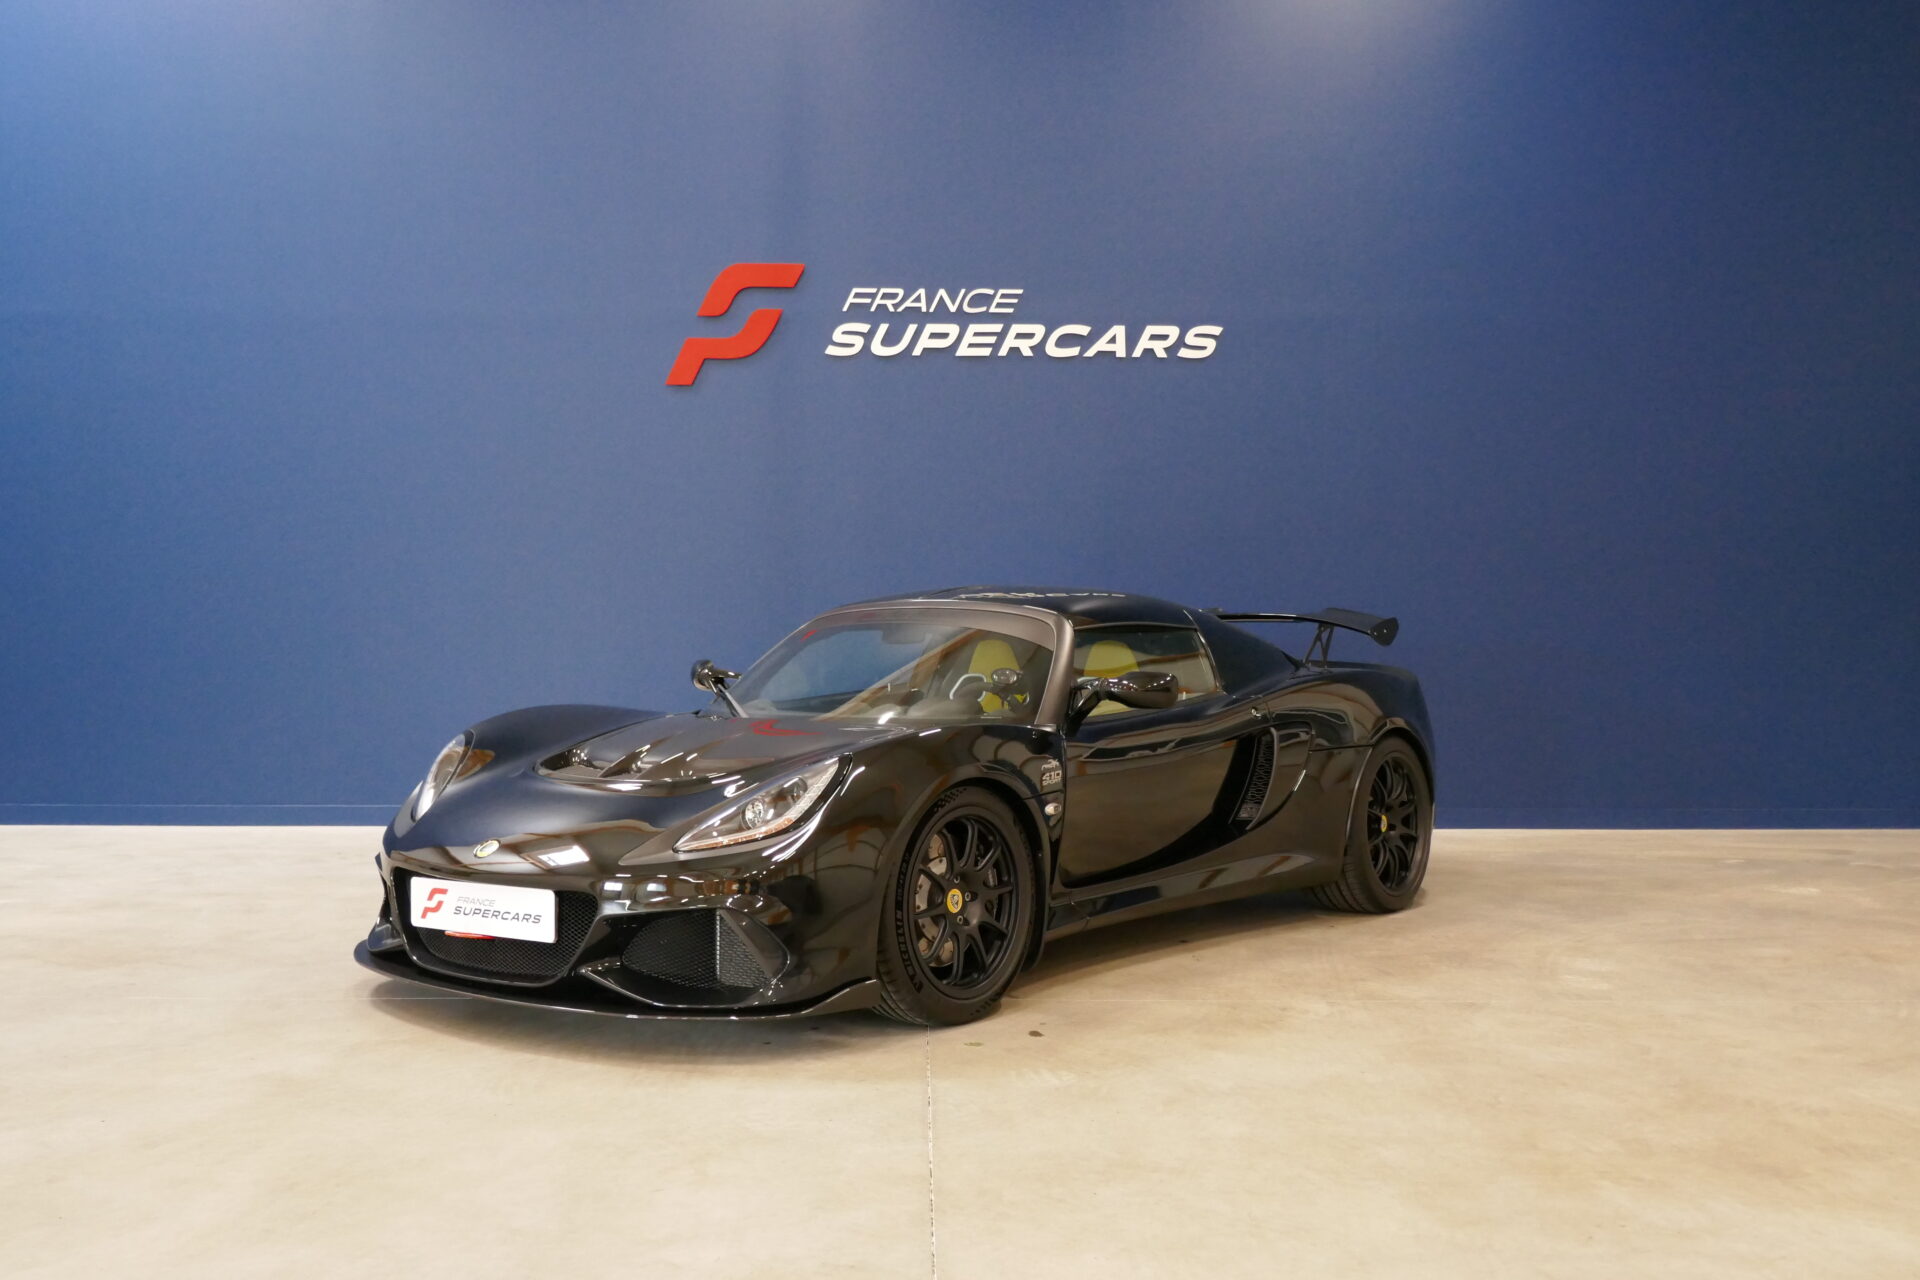 LOTUS EXIGE 410 SPORT 20th ANNIVERSARY FRANCE SUPERCARS